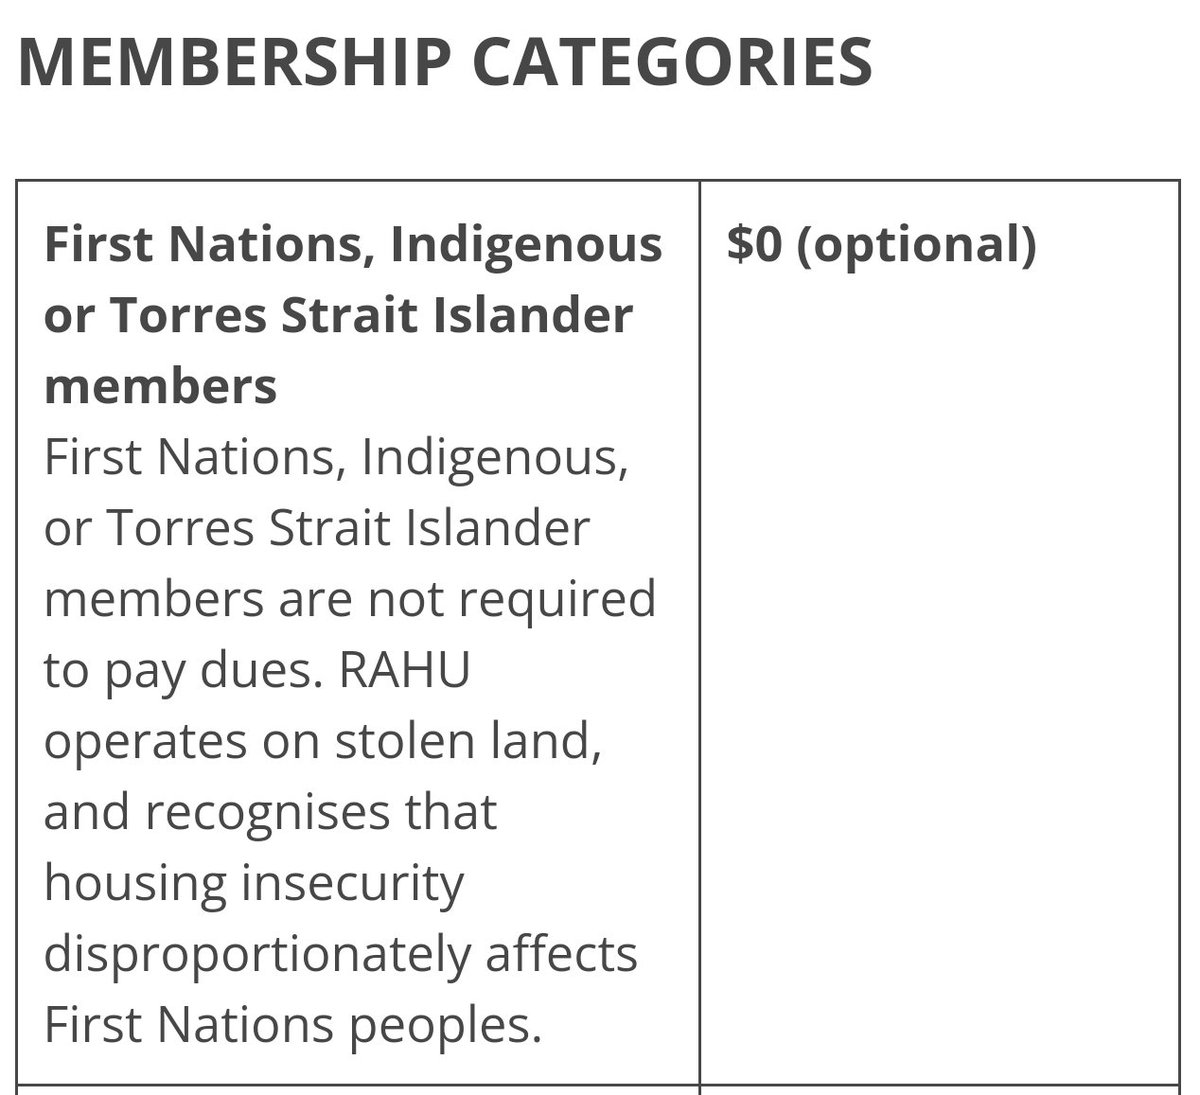 Adding that First Nations mob are not expected to pay a membership fee